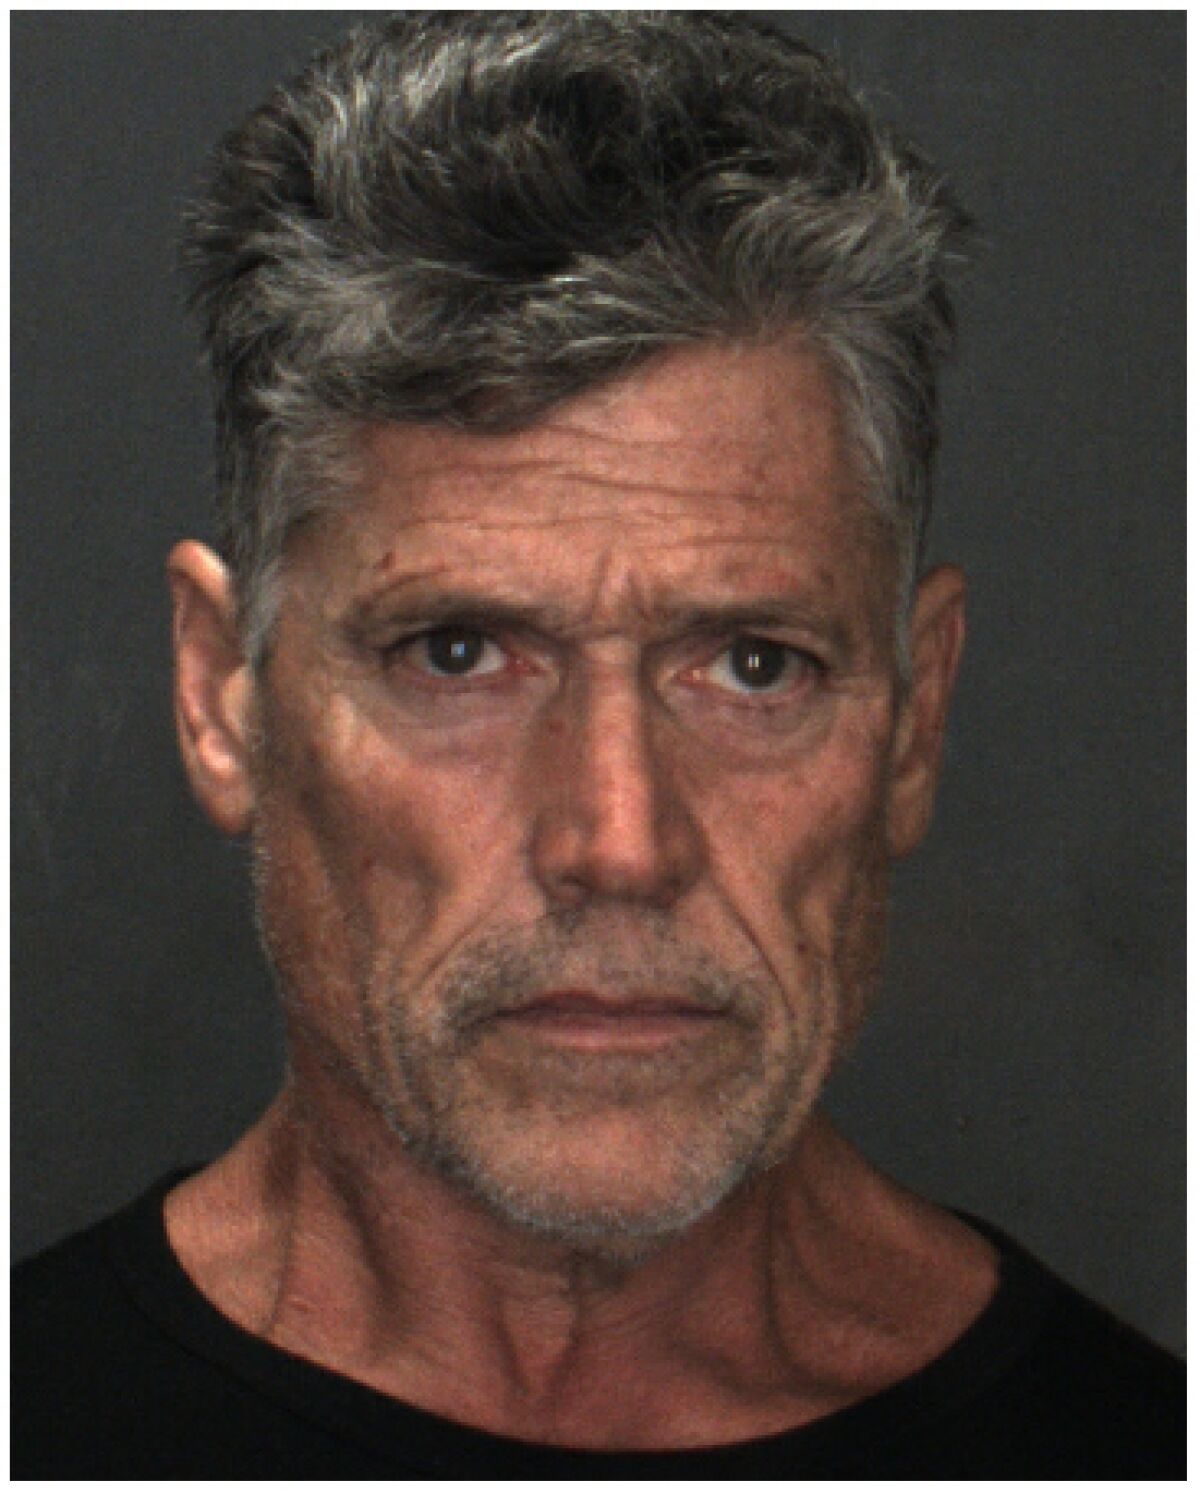 A man in a booking photo